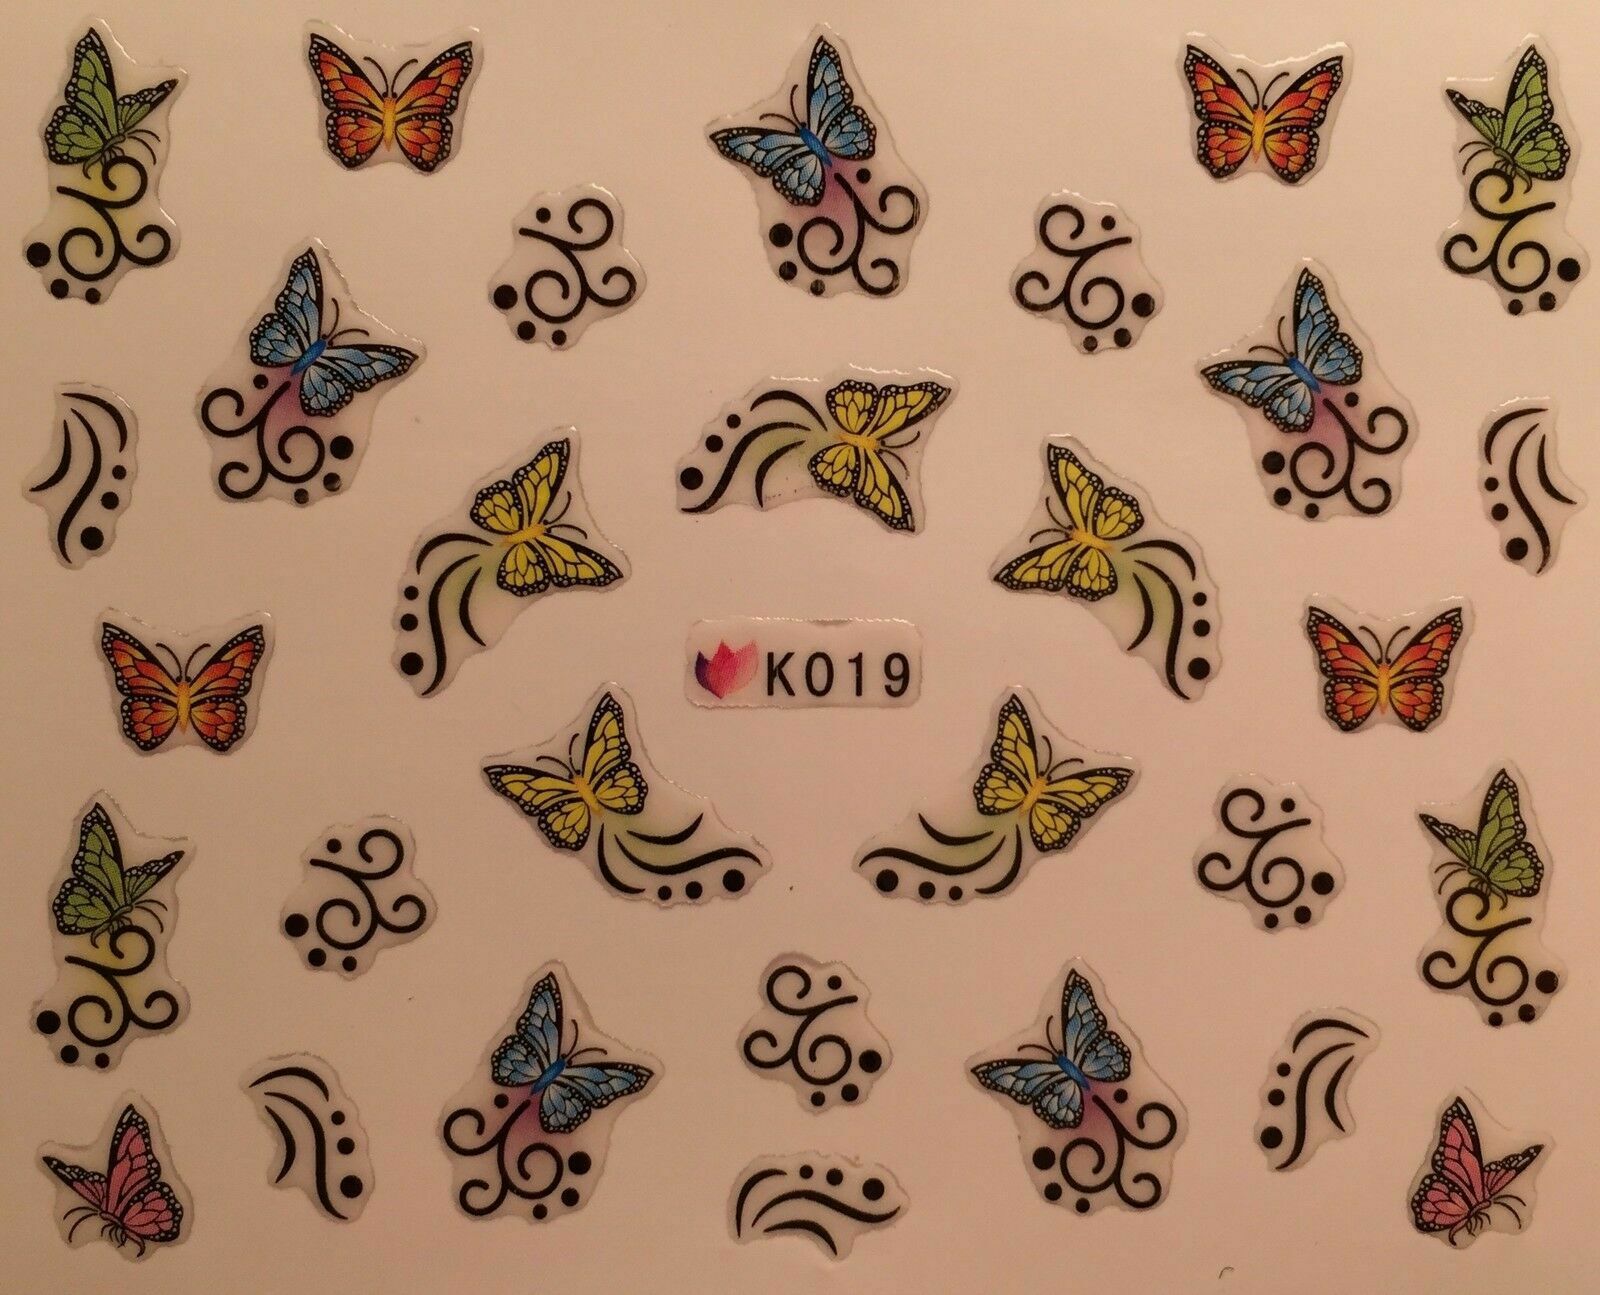 Nail Art 3D Decal Stickers Colorful Butterfly Butterflies K019